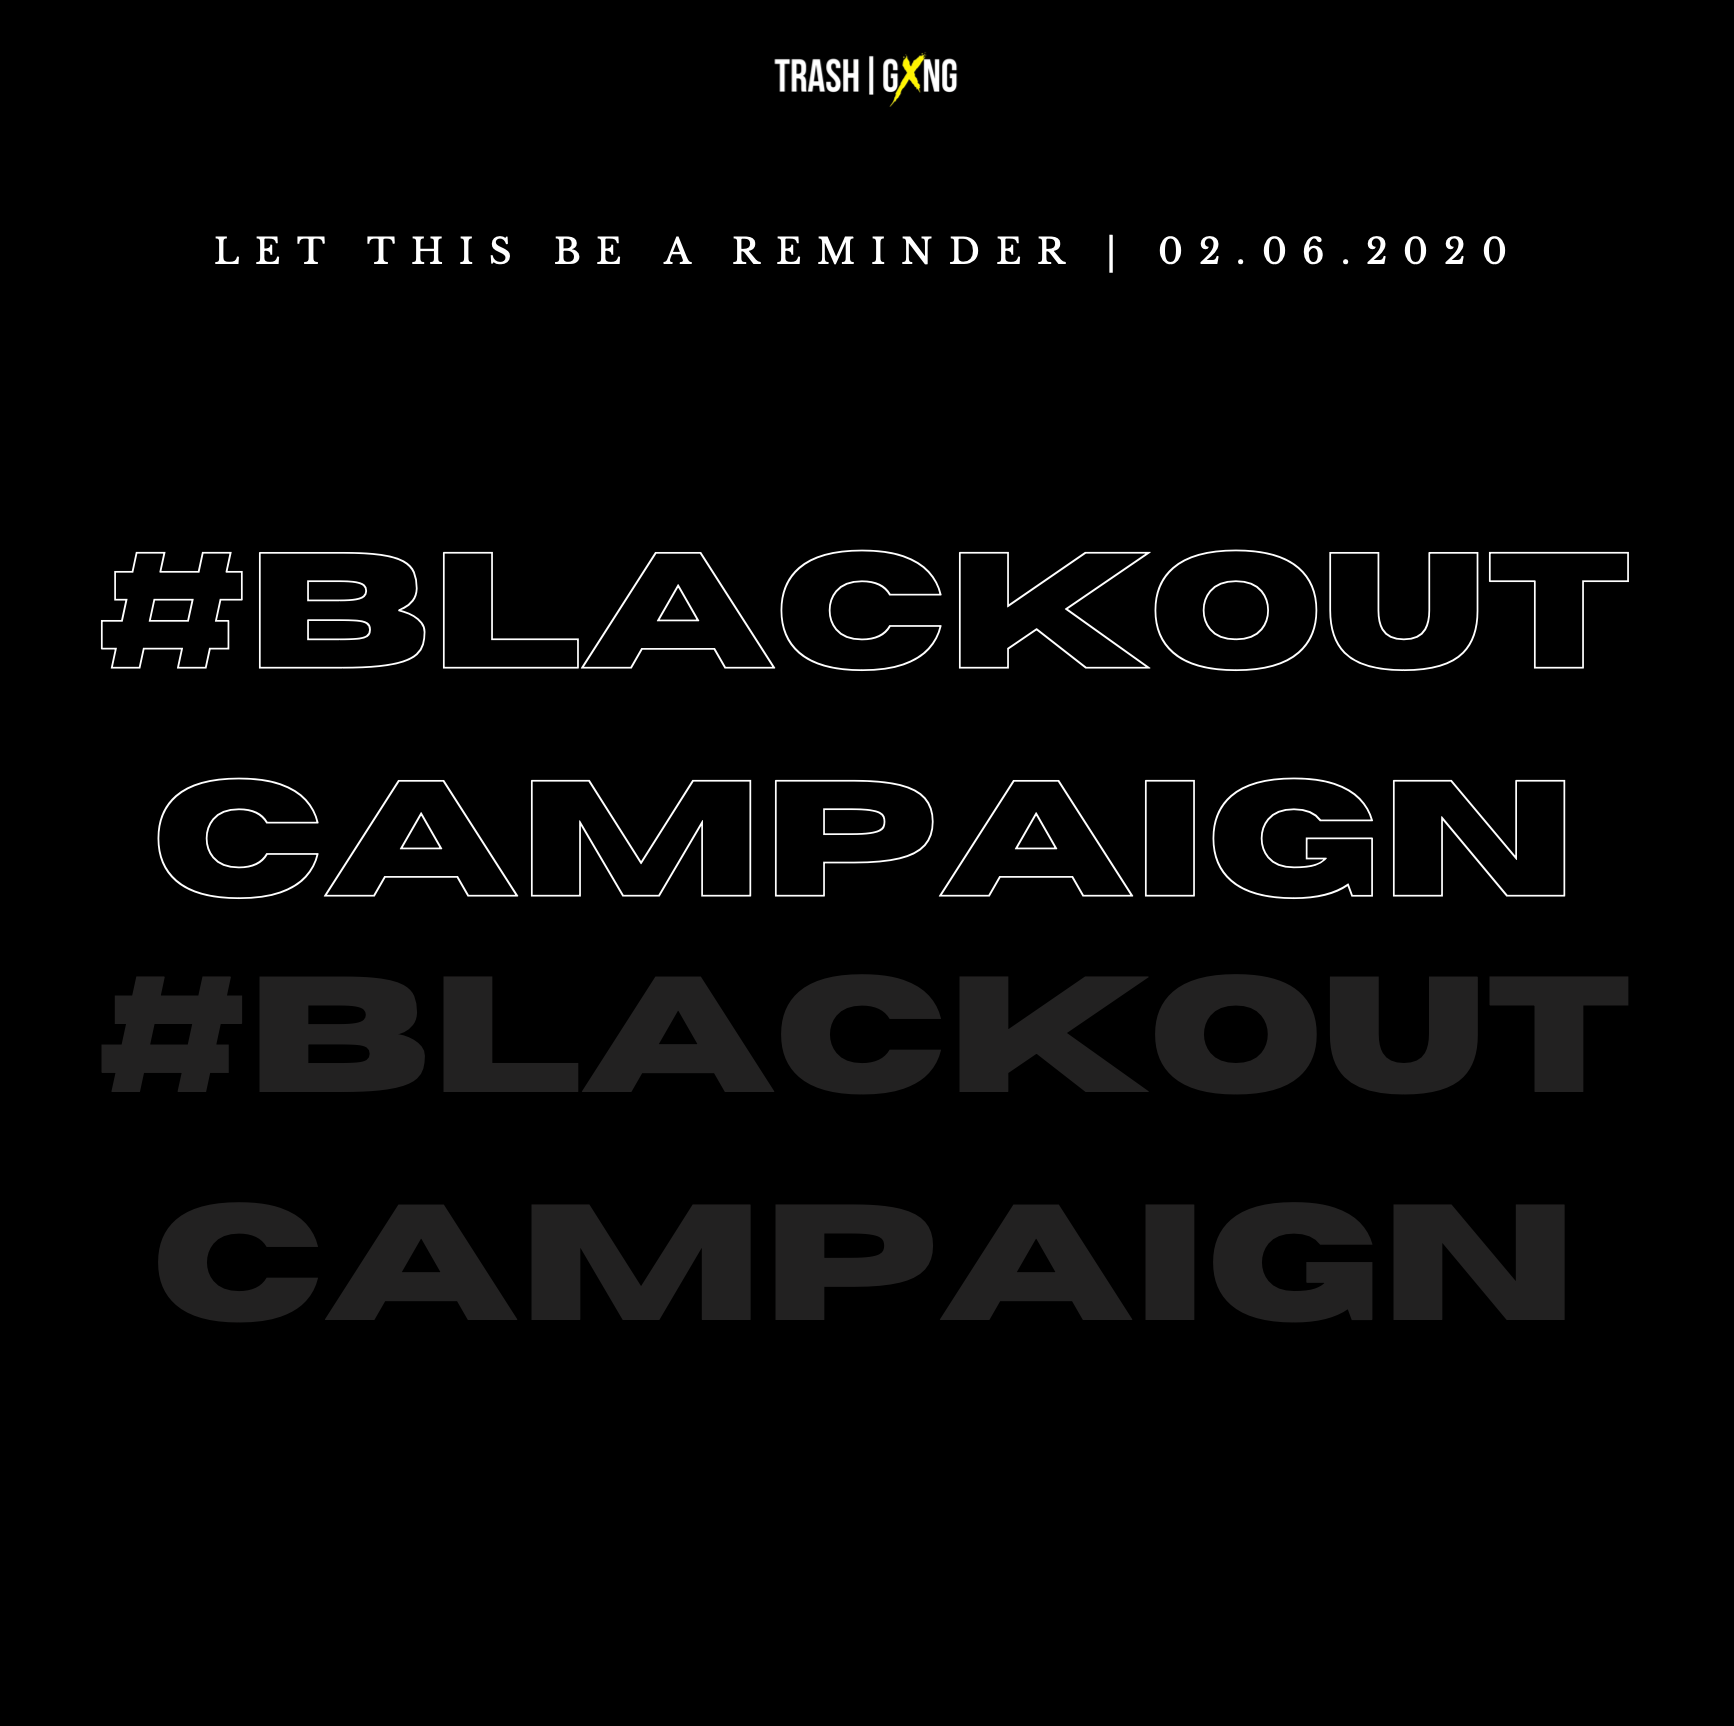 Blackout Campaign - Supporting #BLM